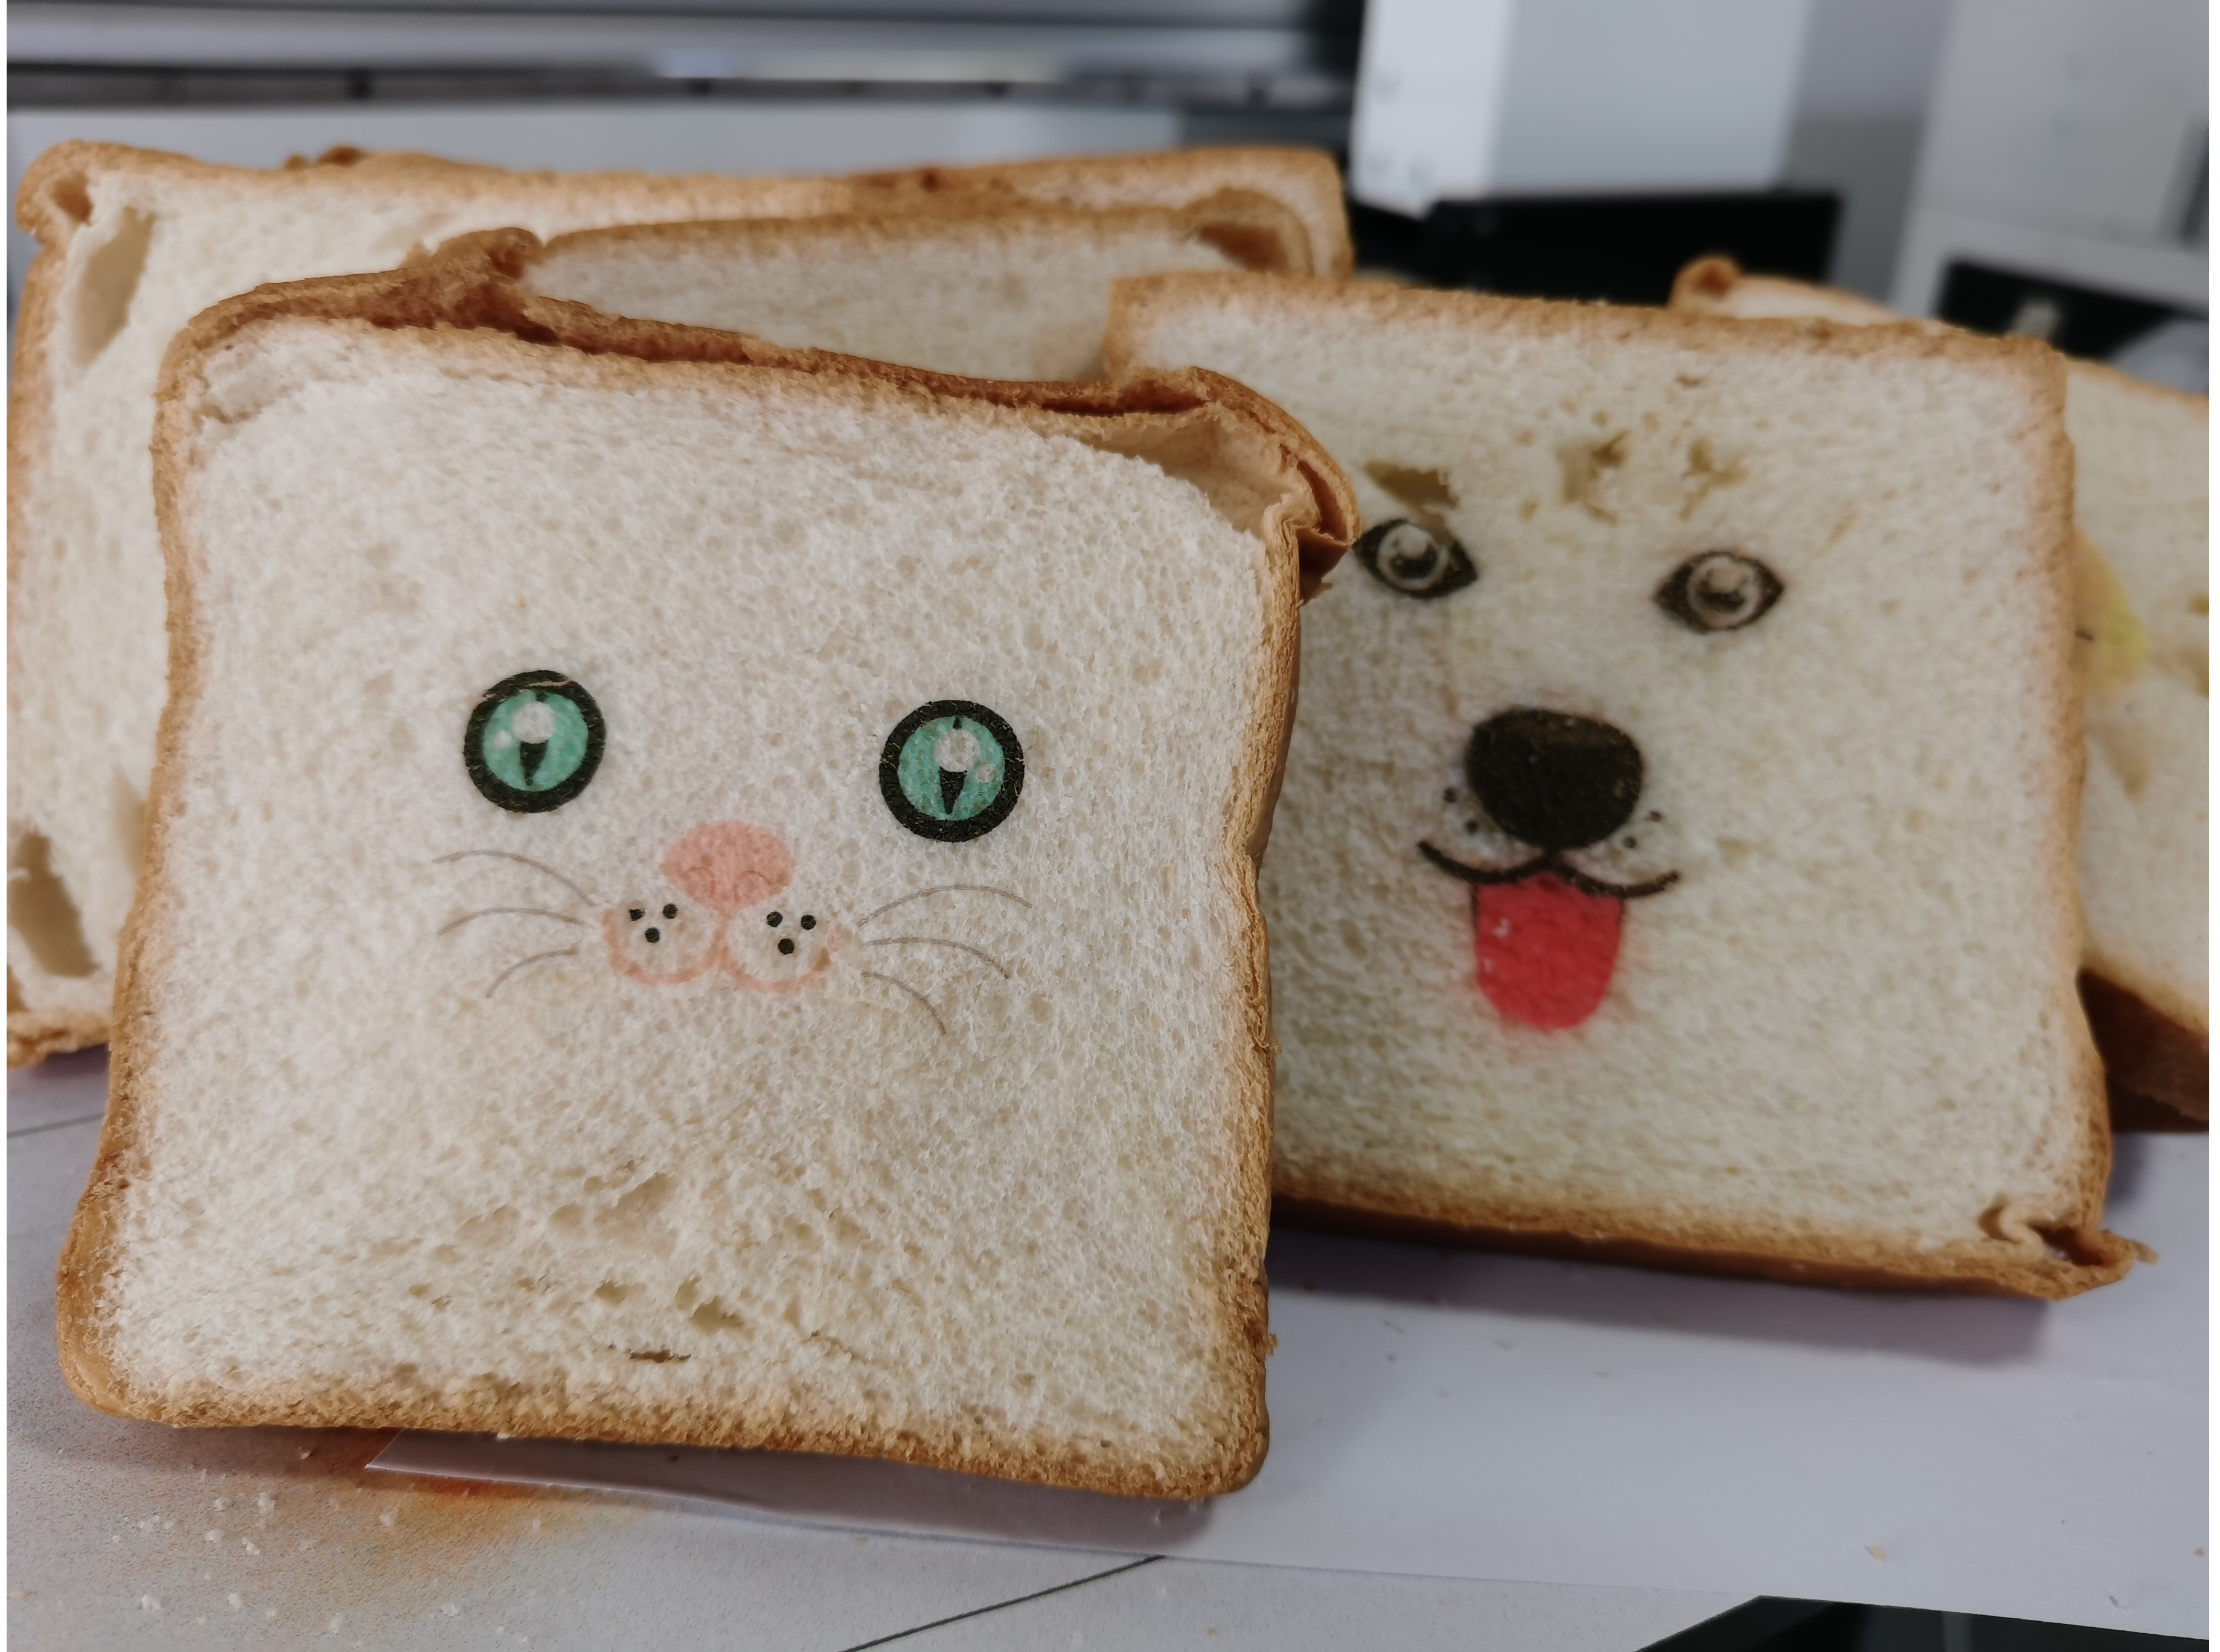 Food Printing Technology: Who would say no to a cute animal on toast